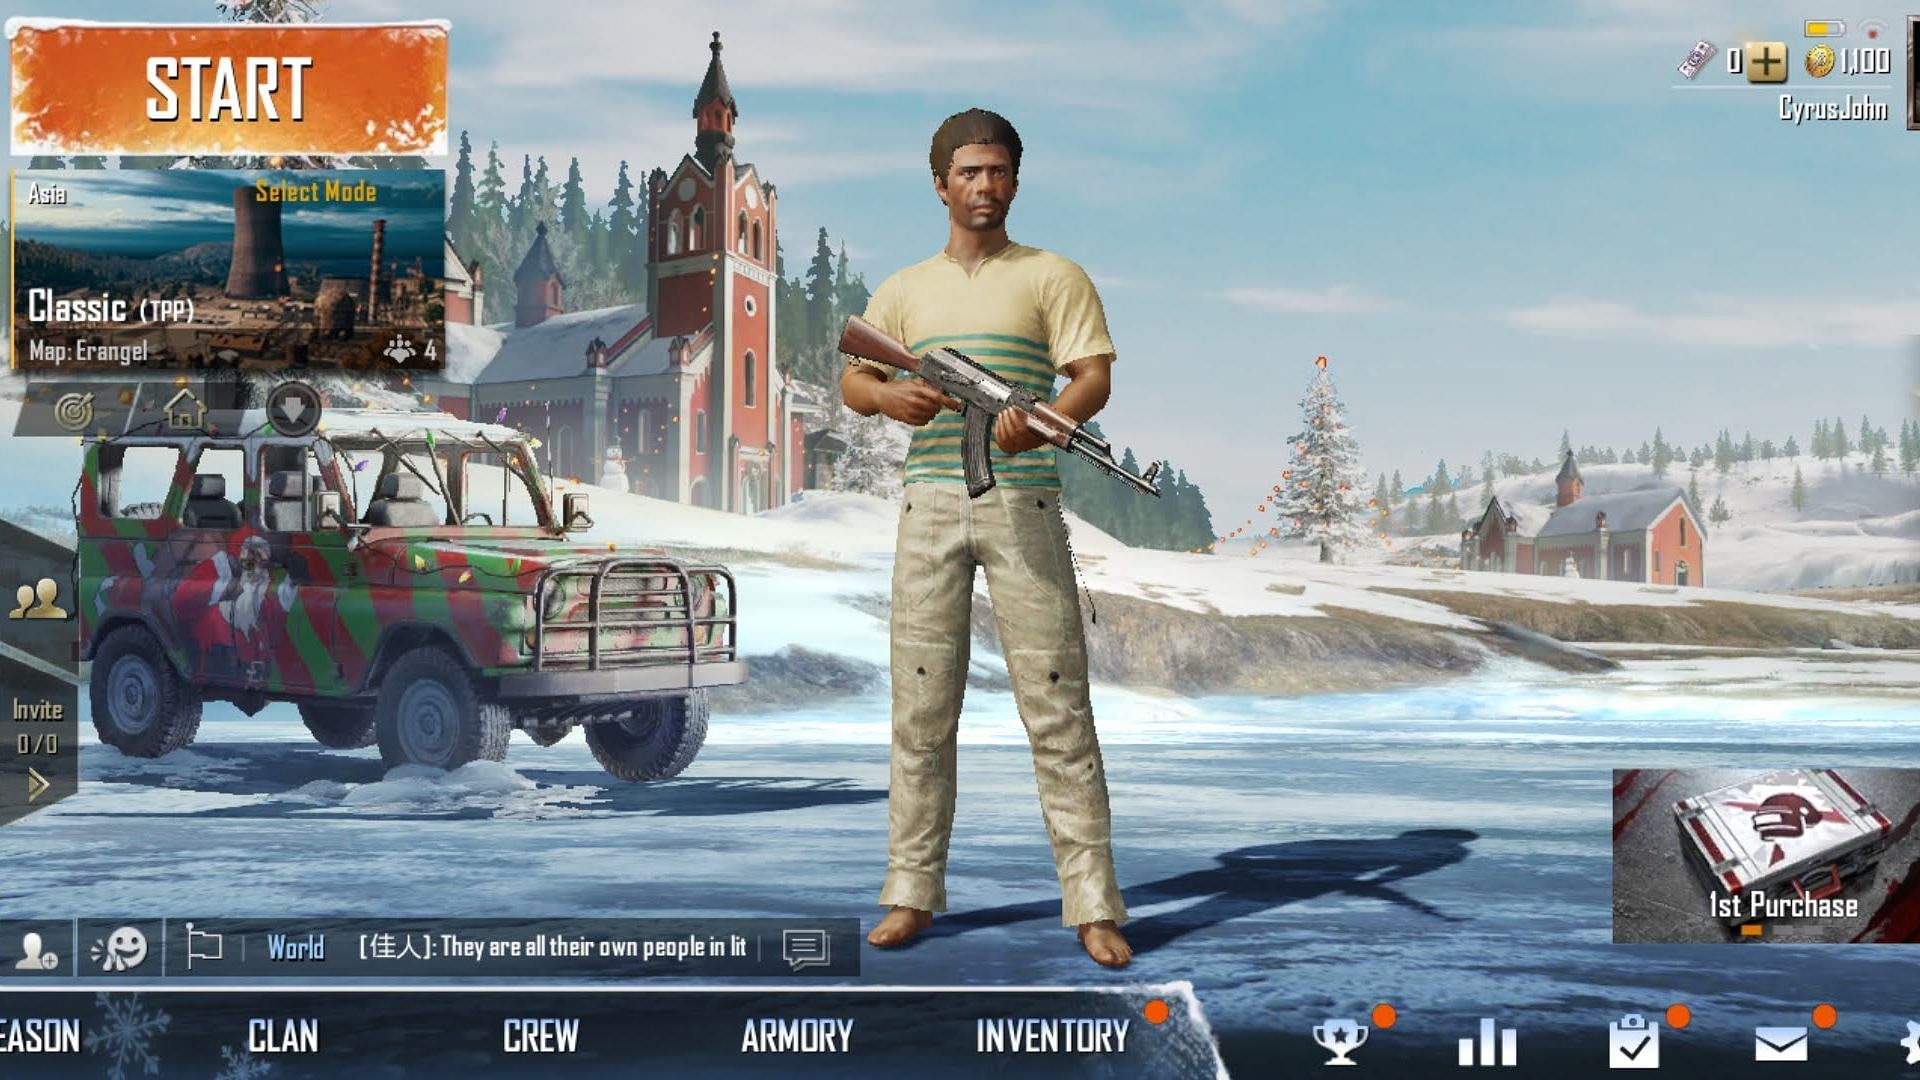 Pubg Anti Cheat Detection System Announced Backed By 10 Year Ban